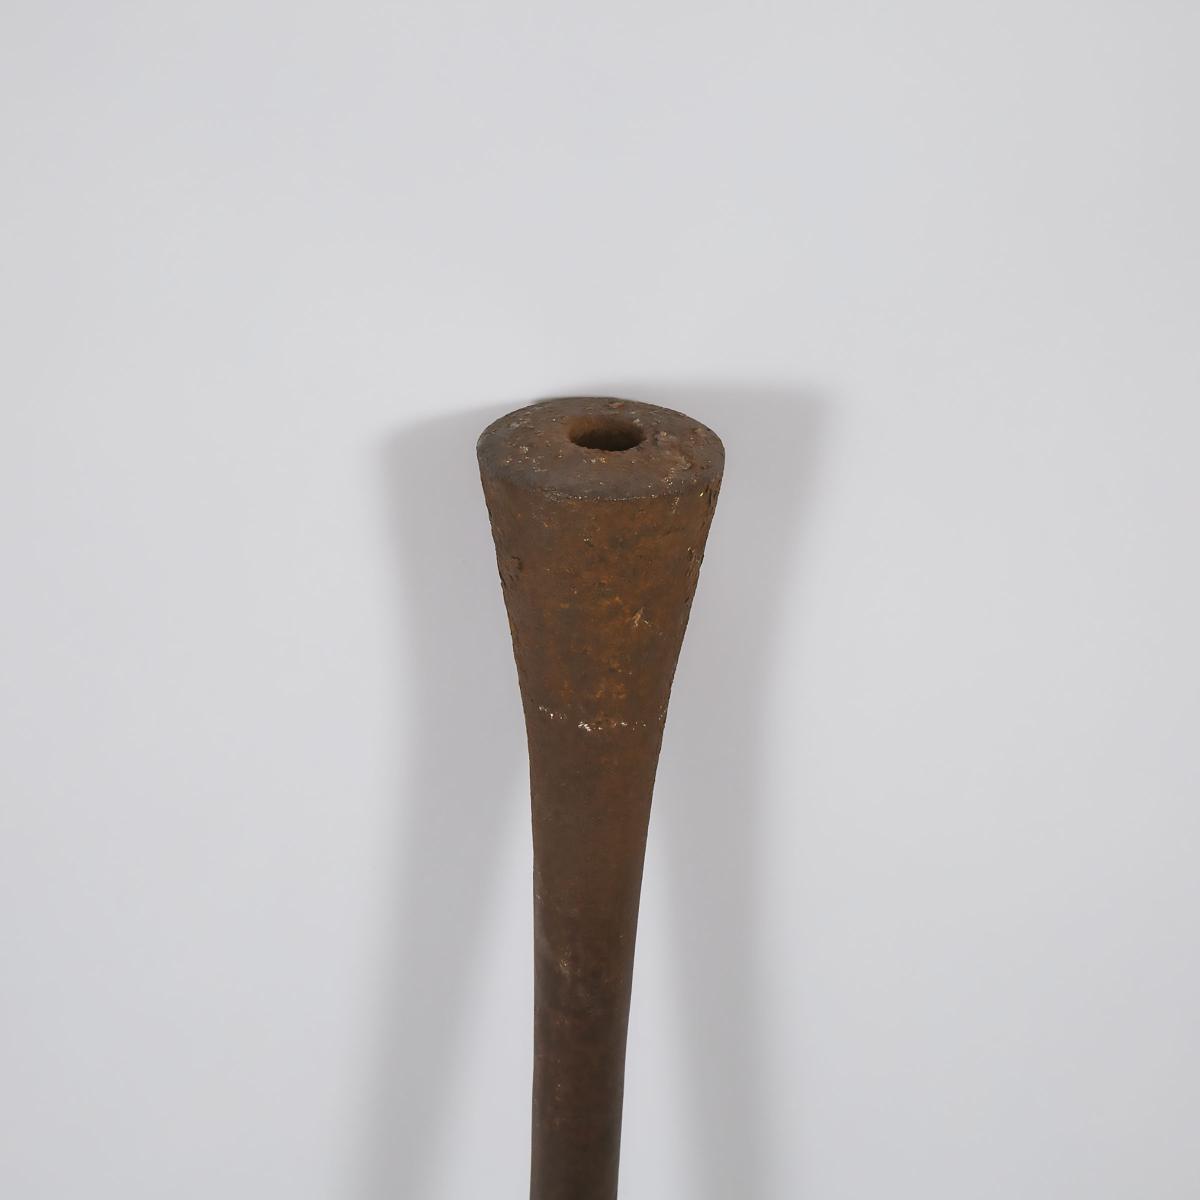 Glass Blowpipe and a Pyro Optical Pyrometer, mid 20th century, length 58 in — 147.3 cm - Image 5 of 5